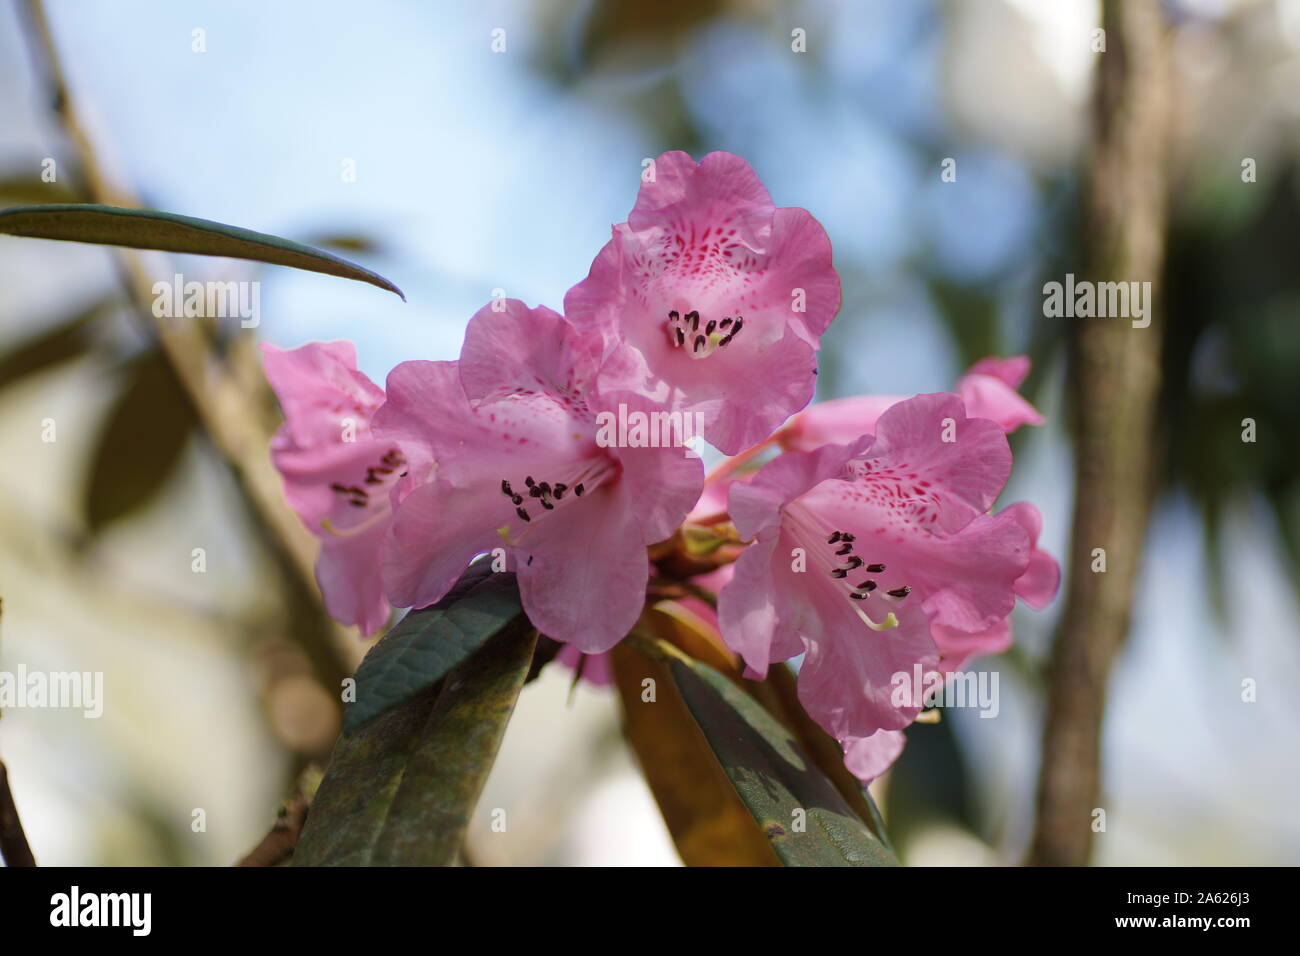 Rhododendron adenogynum 'Kirsty' at Clyne gardens, Swansea, Wales, UK. Stock Photo